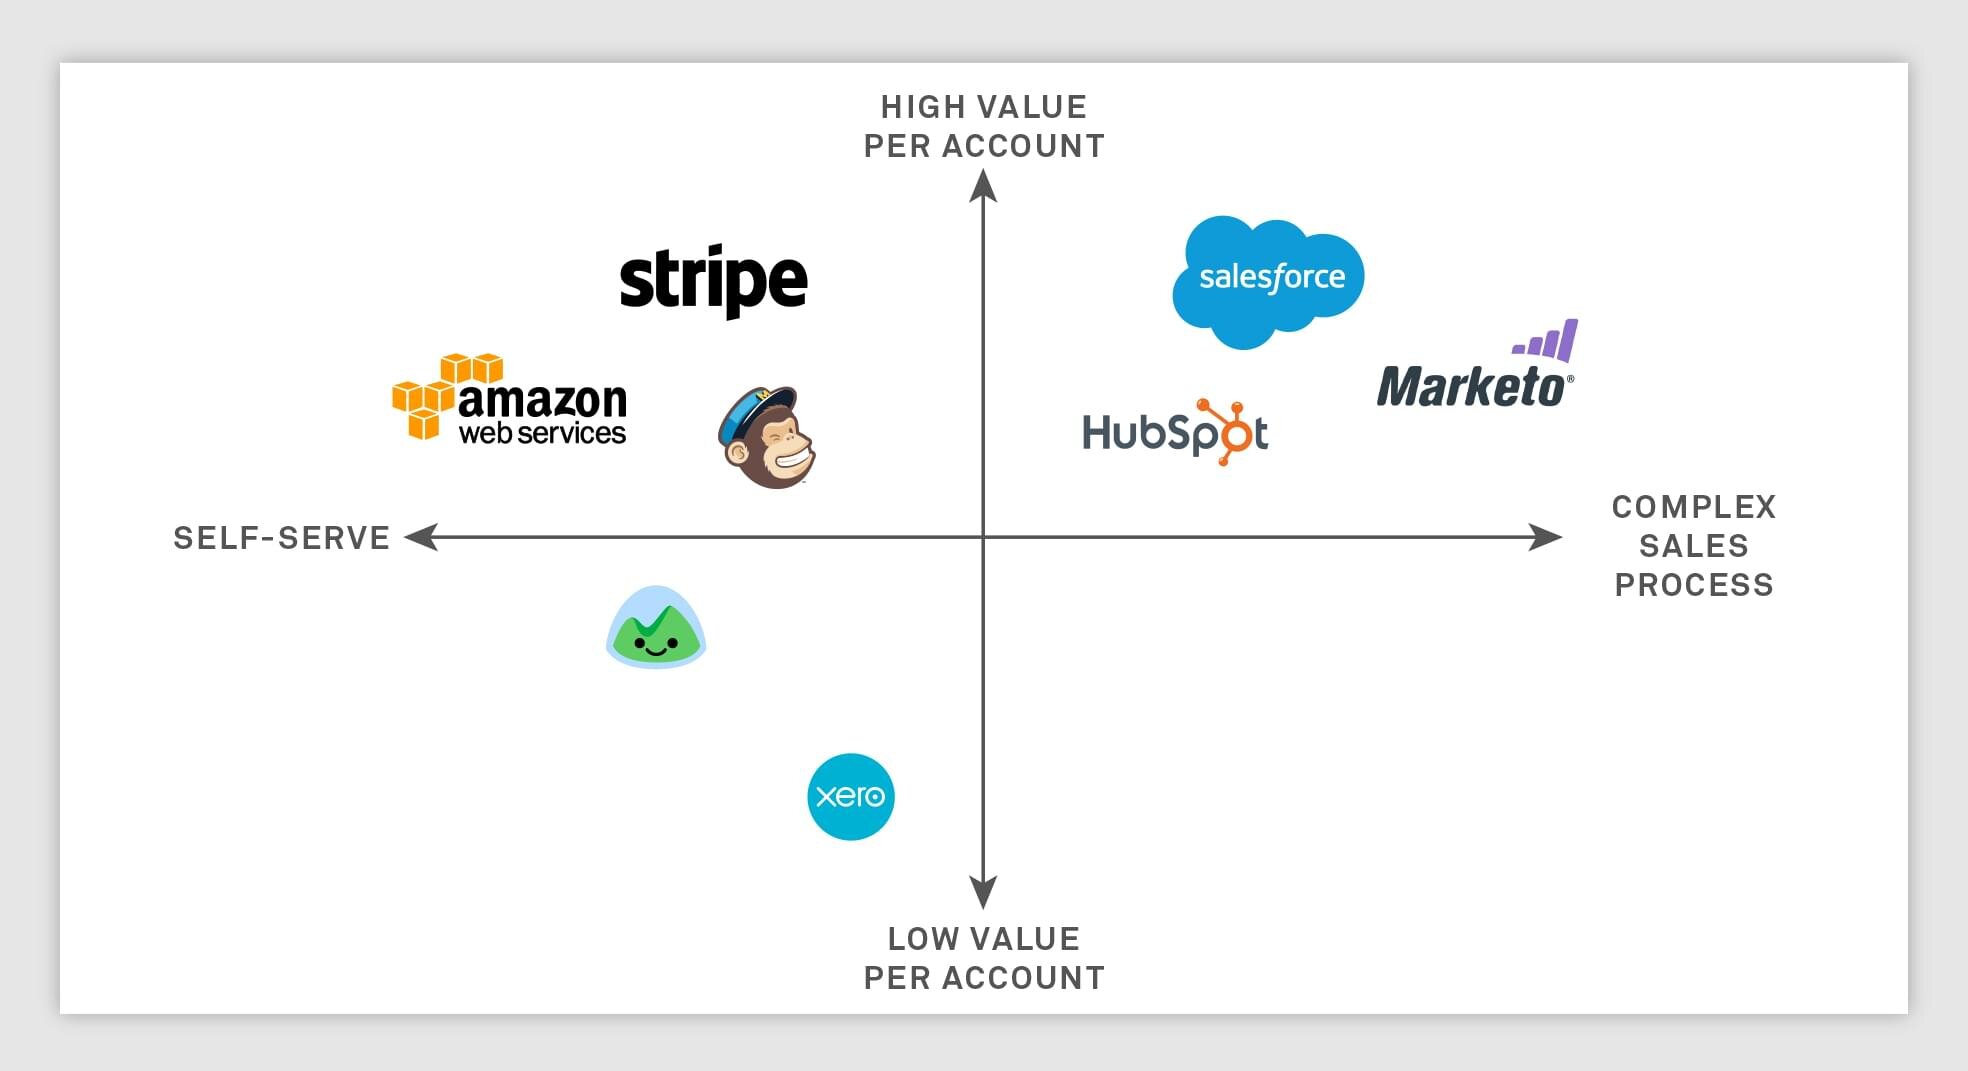 From Intercom’s Guide to Pricing